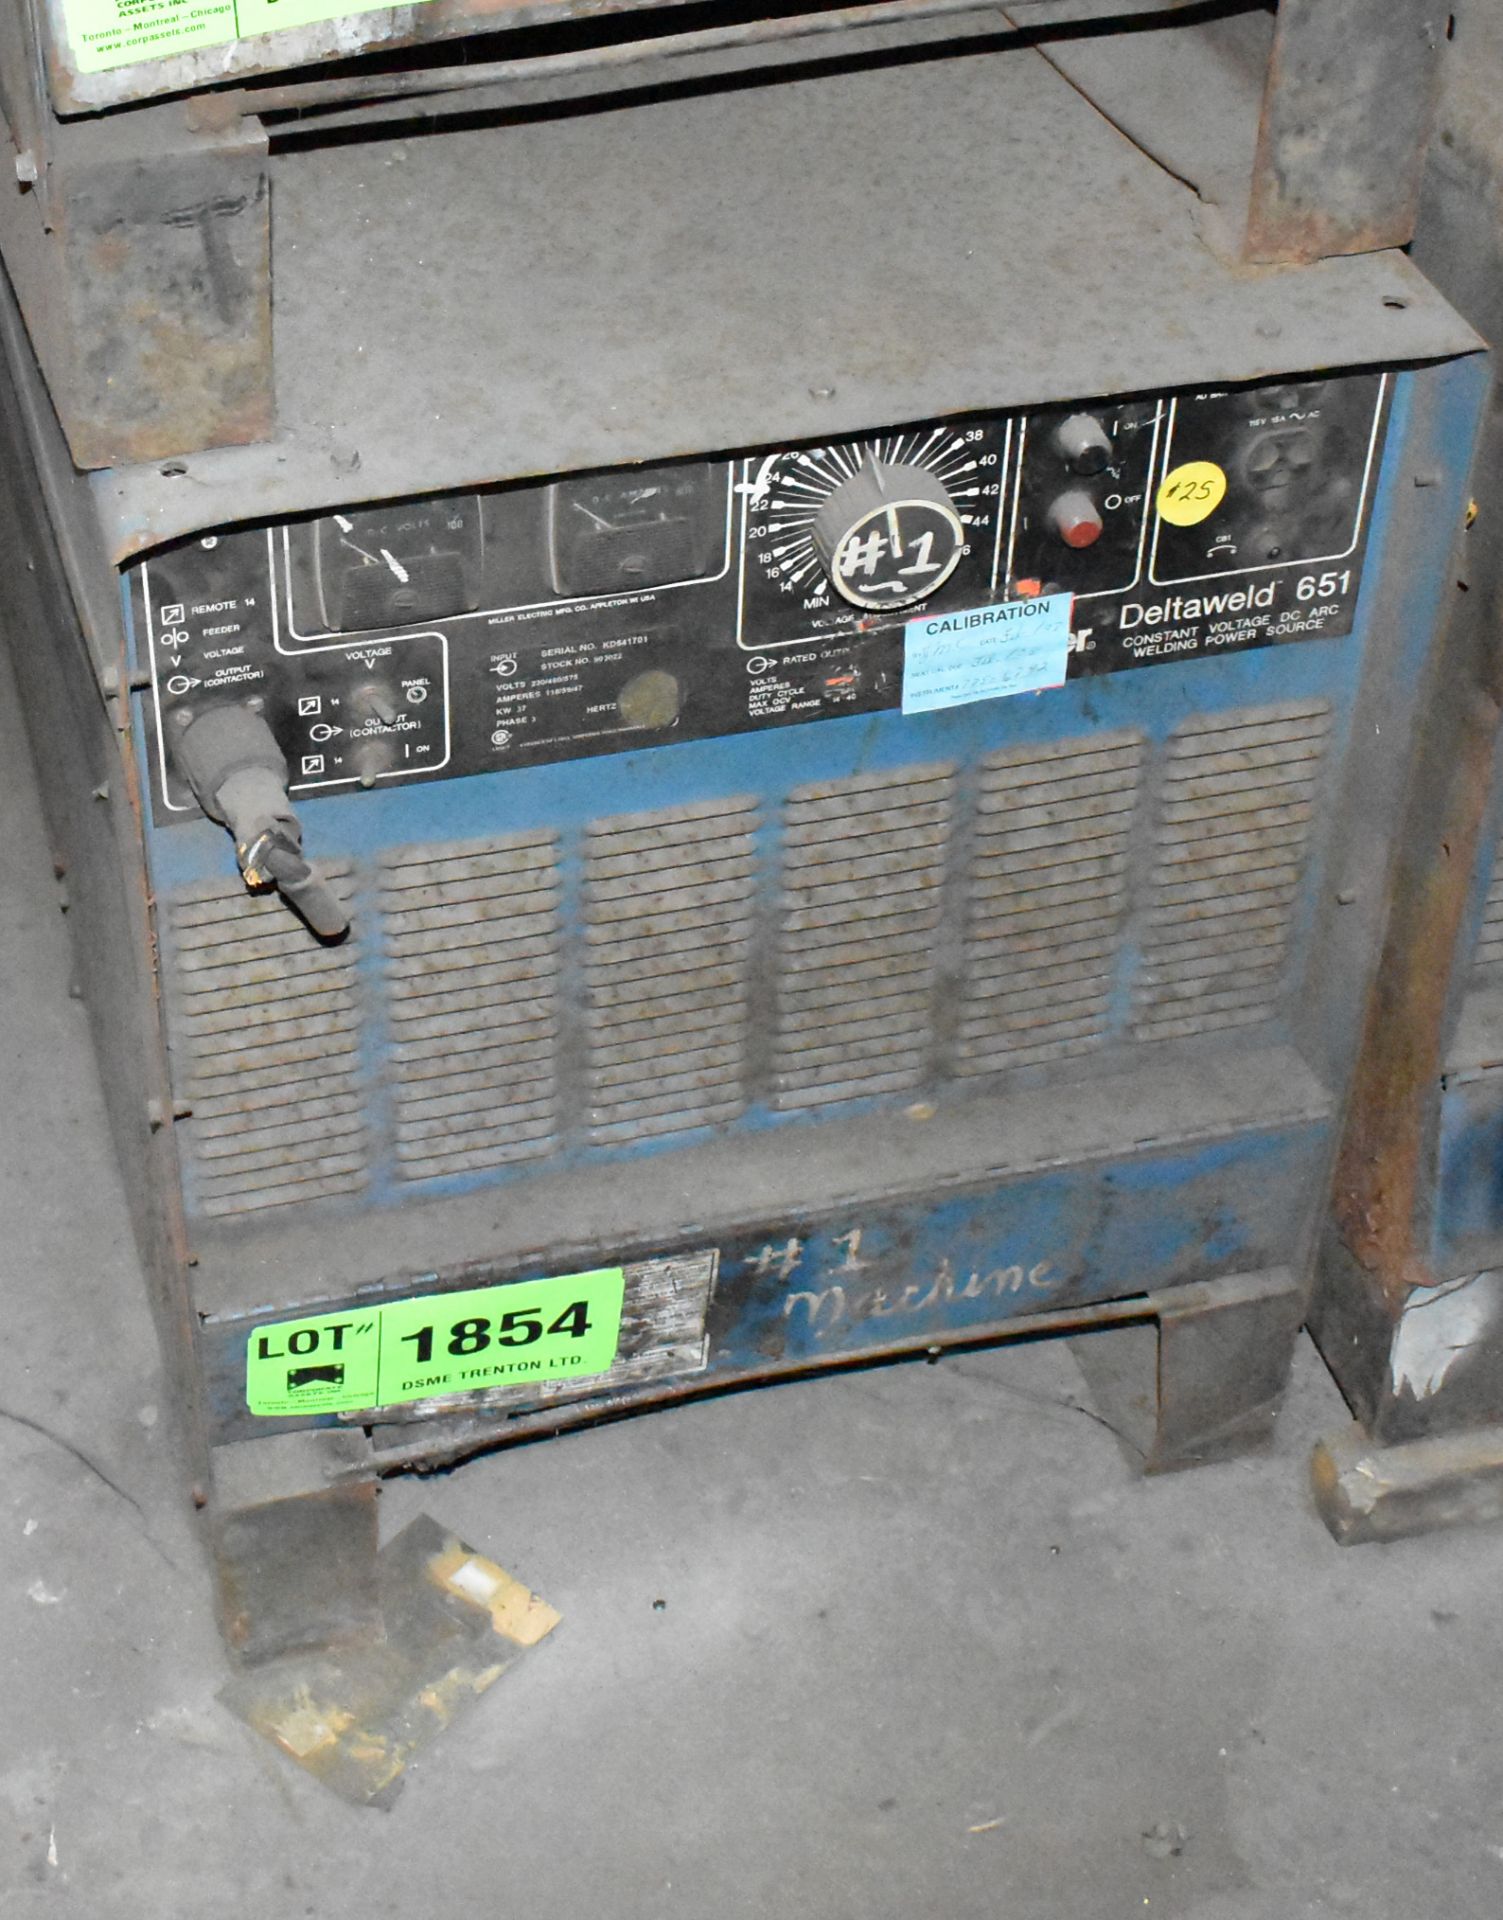 MILLER DELTAWELD 651 WELDING POWER SOURCE [RIGGING FEE FOR LOT# 1854 - $40 USD +PLUS TAXES]